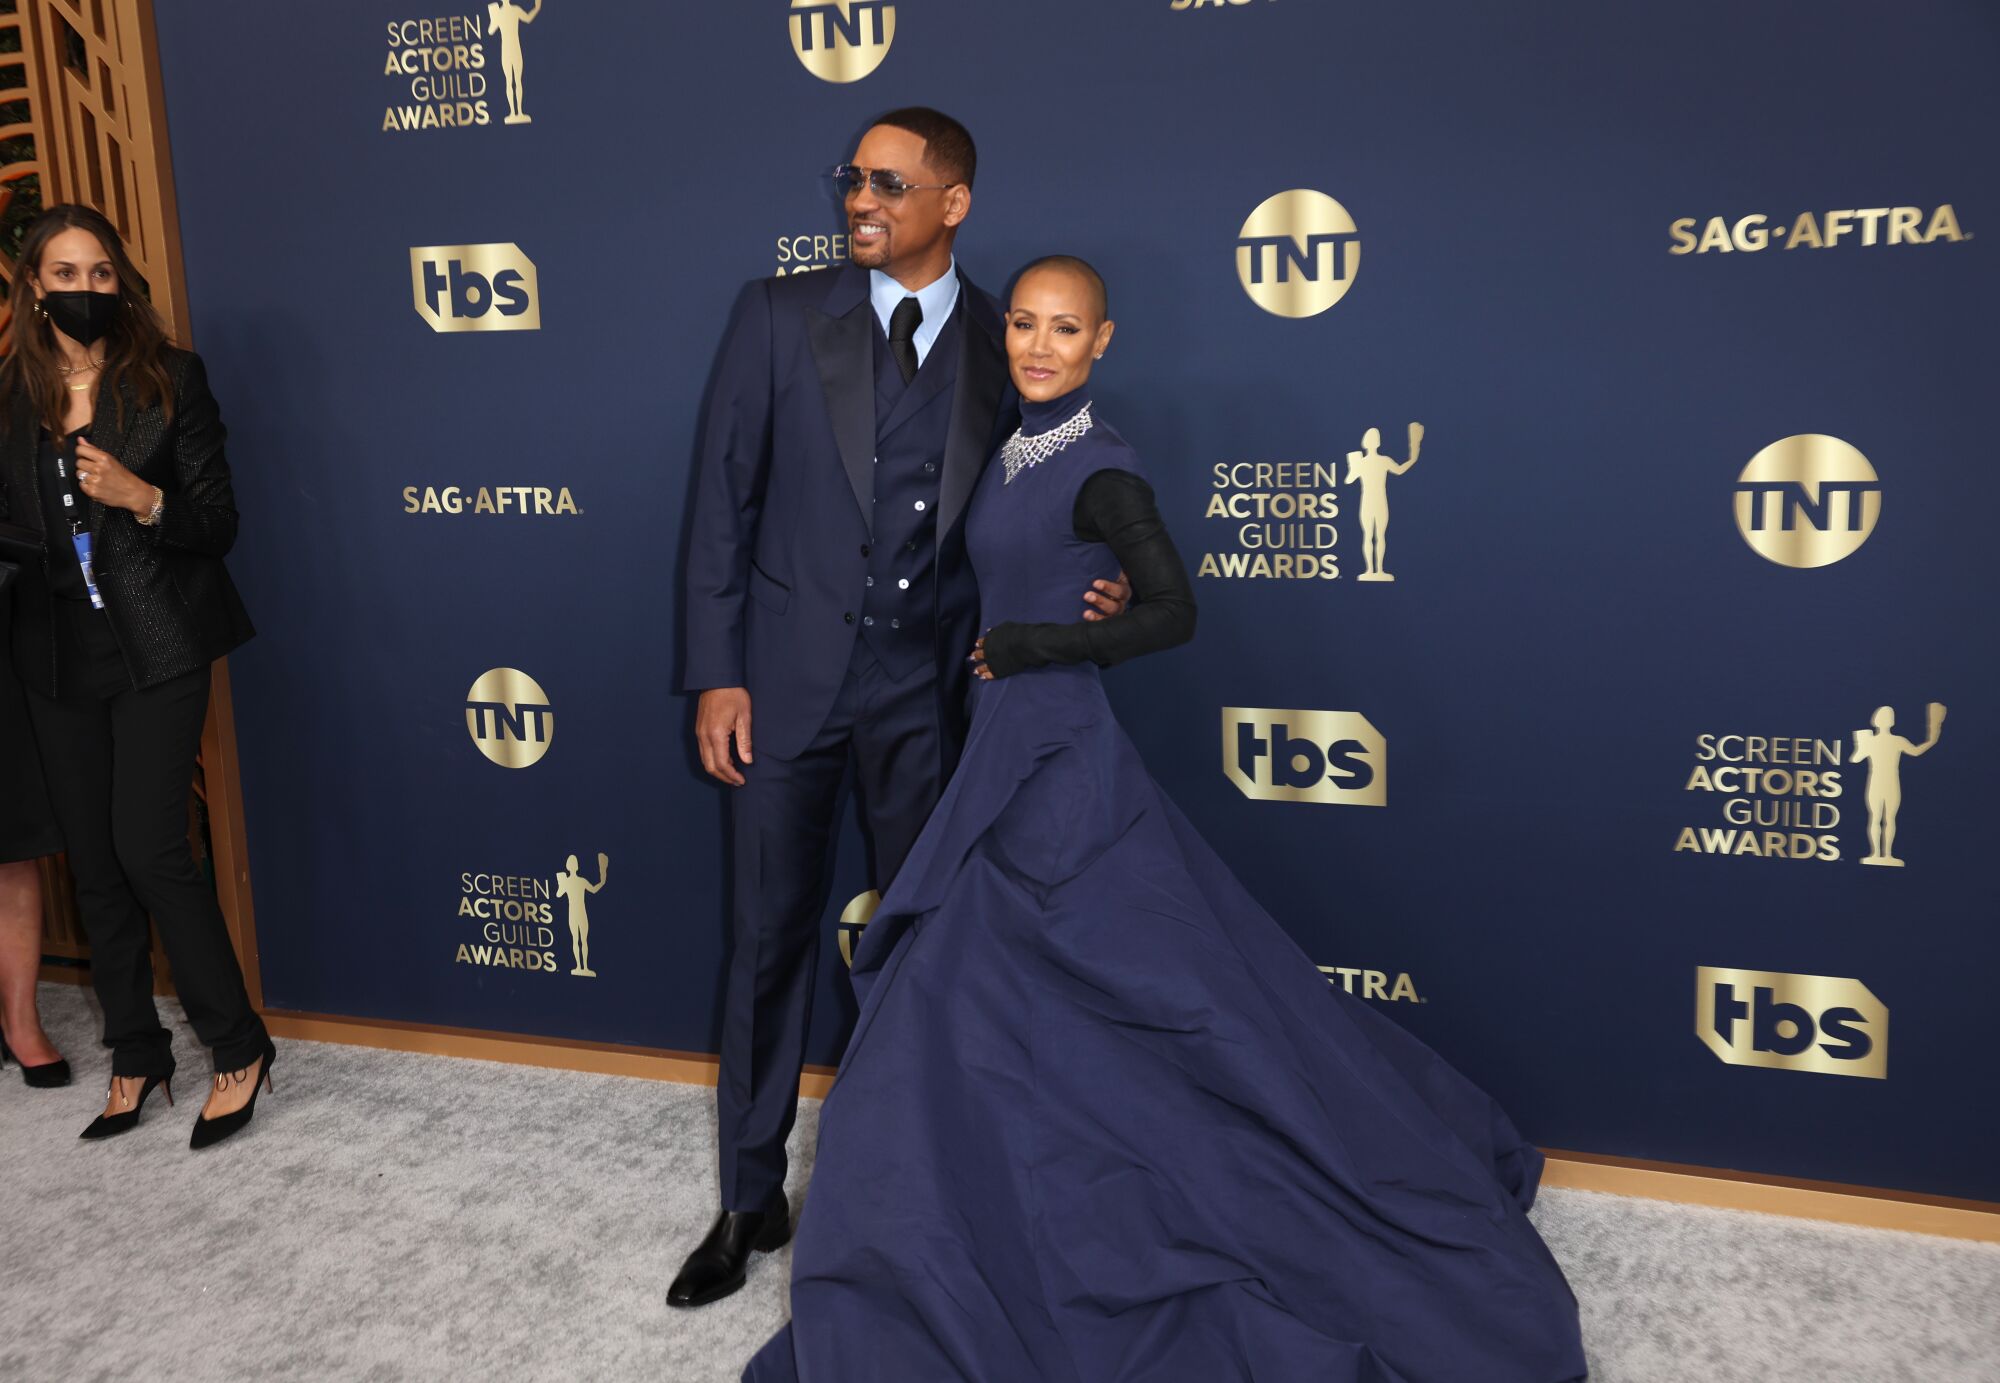 Will Smith and Jada Pinkett-Smith arriving at the 28th Screen Actors Guild Awards.